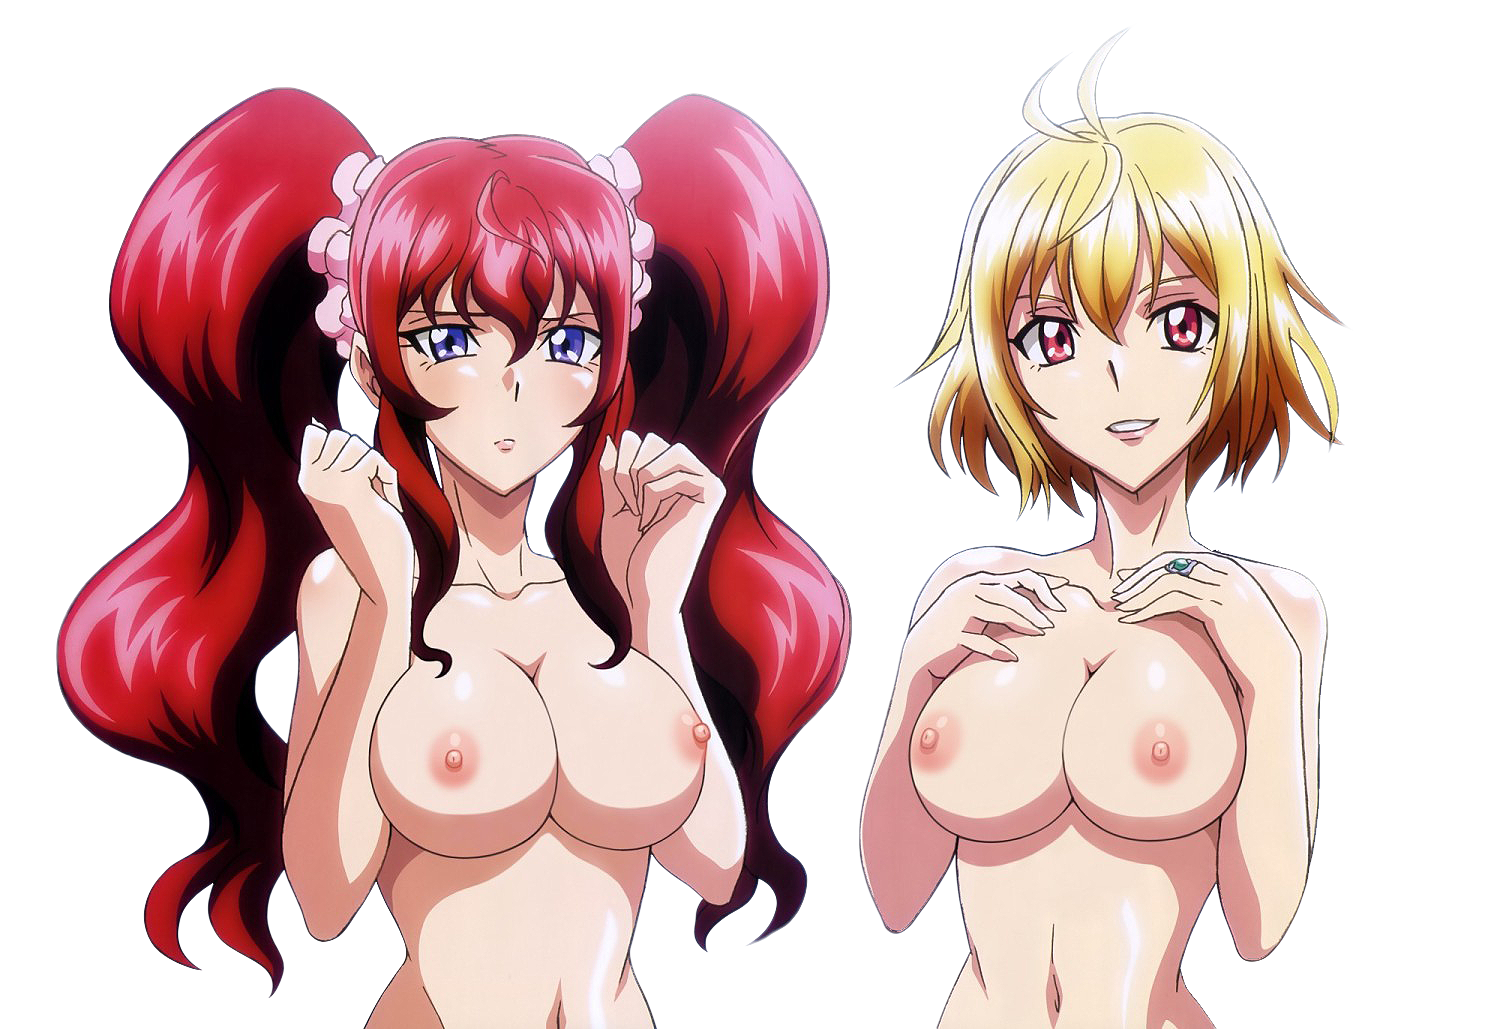 Code Geass Cross Ange Anime Crossover Anime Sketch The Best Porn Website.